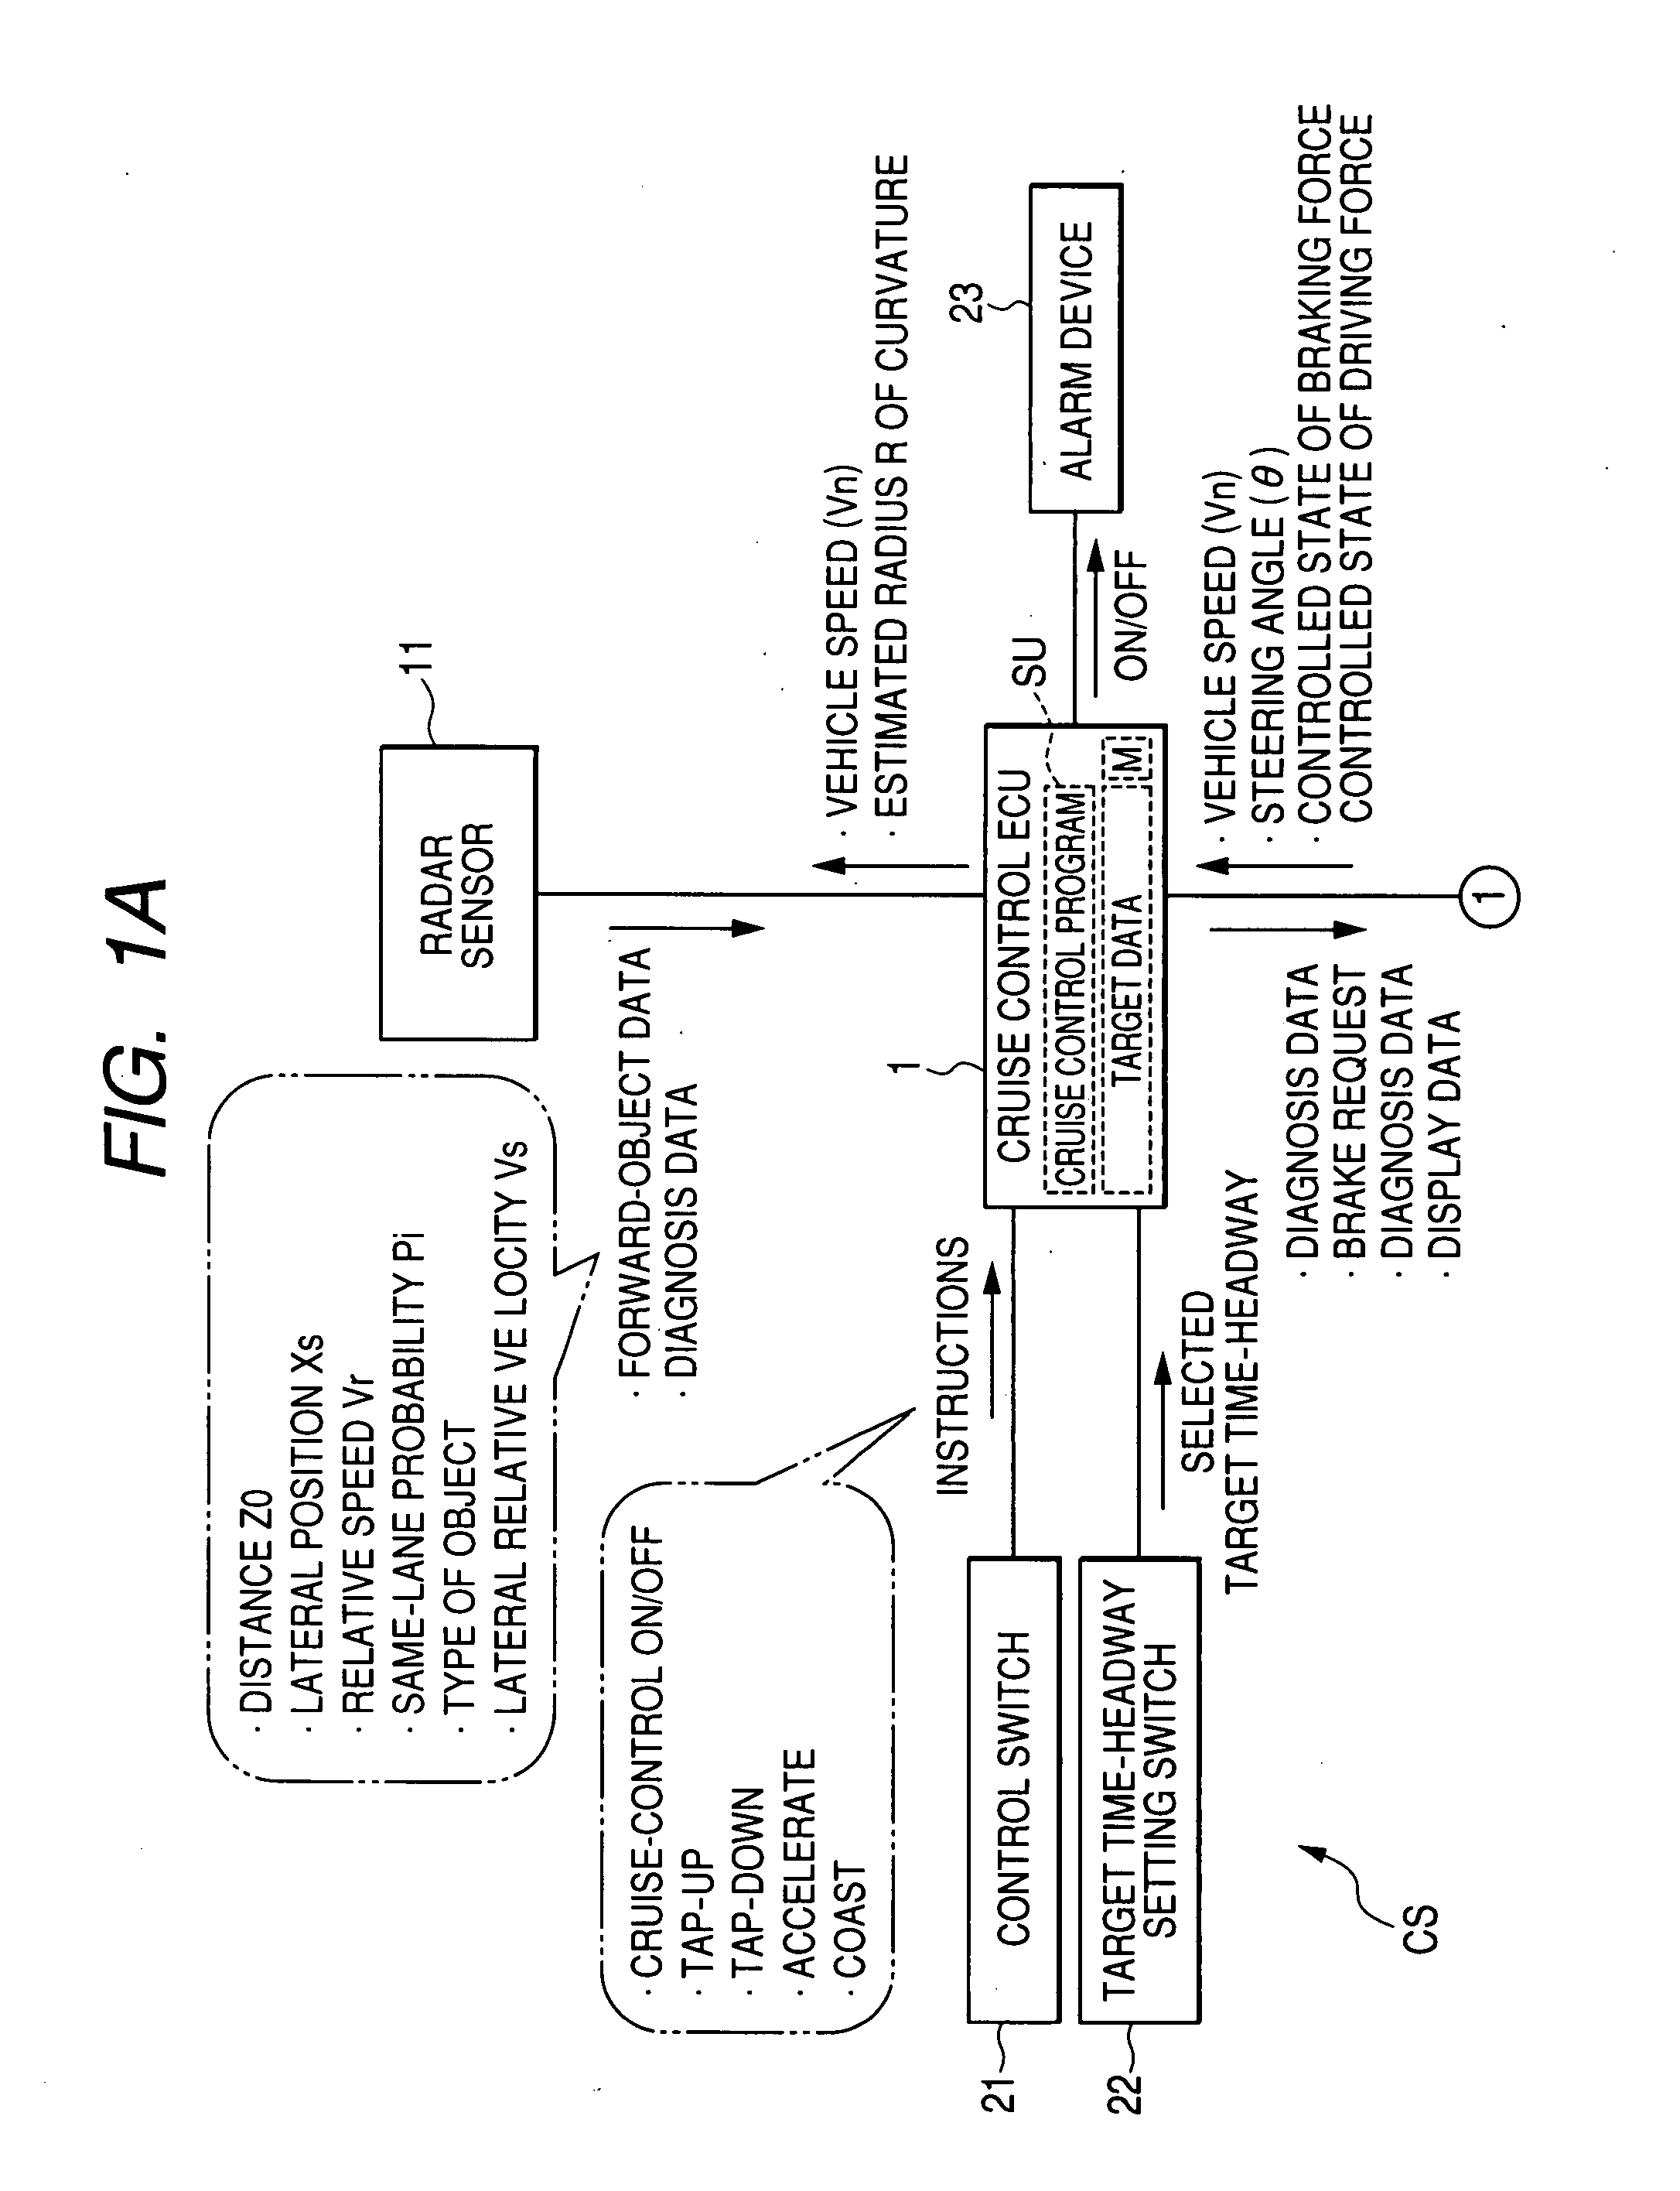 Cruise control system for determining object as target for cruise control